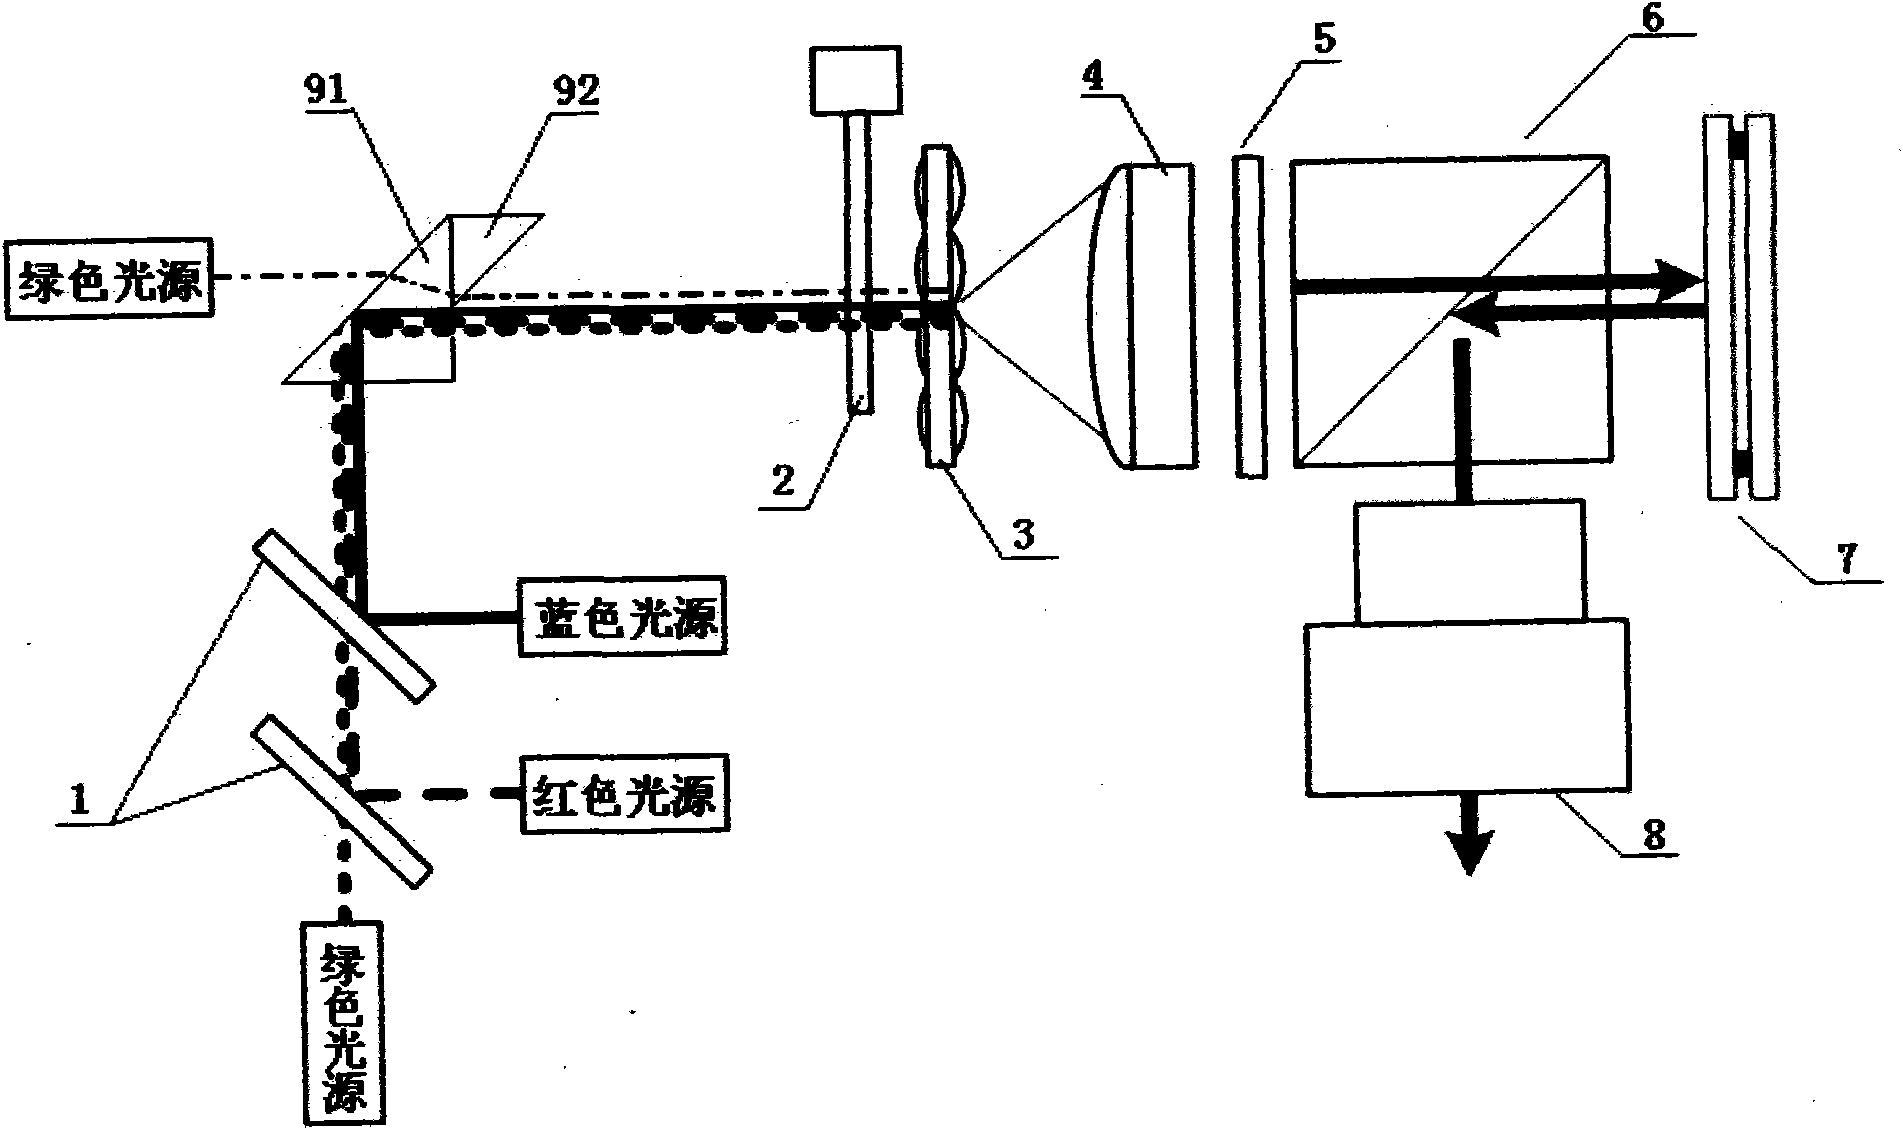 Optical engine of multiple-path green light source projector